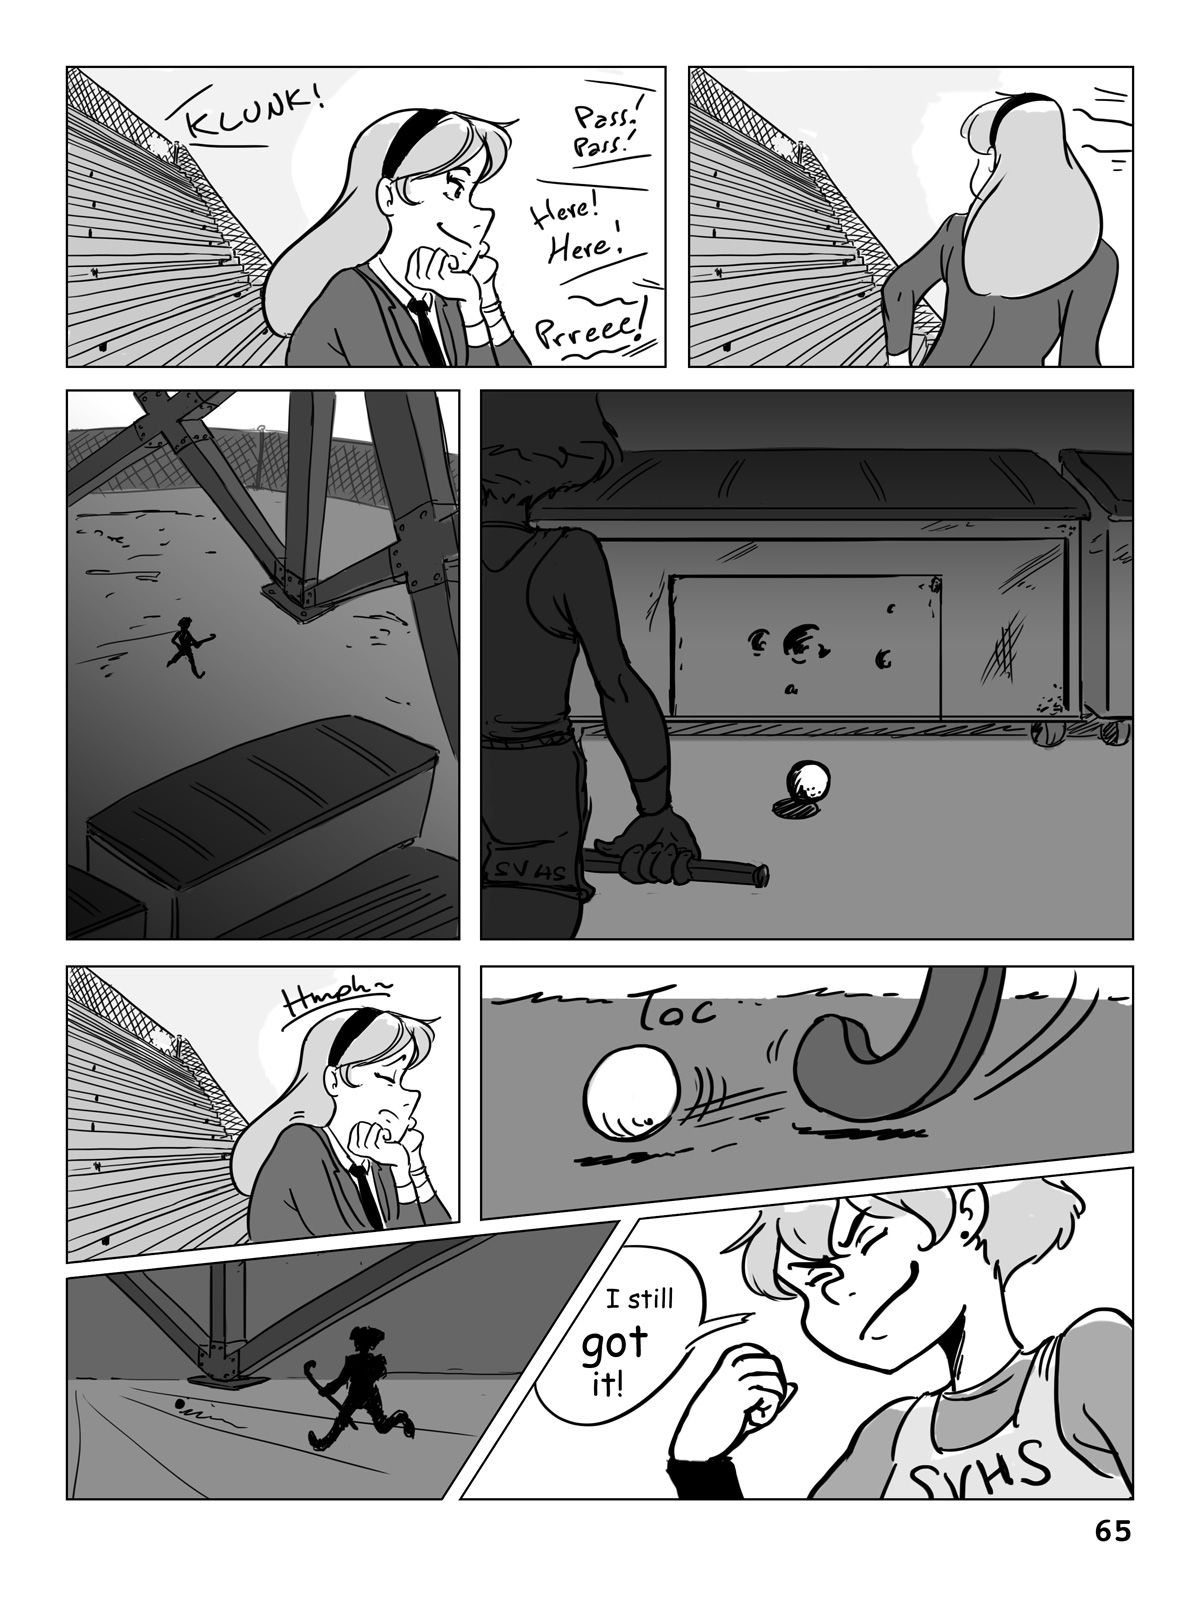 Hockey, Love, & GUTS! – Chapter 4 – Page 65